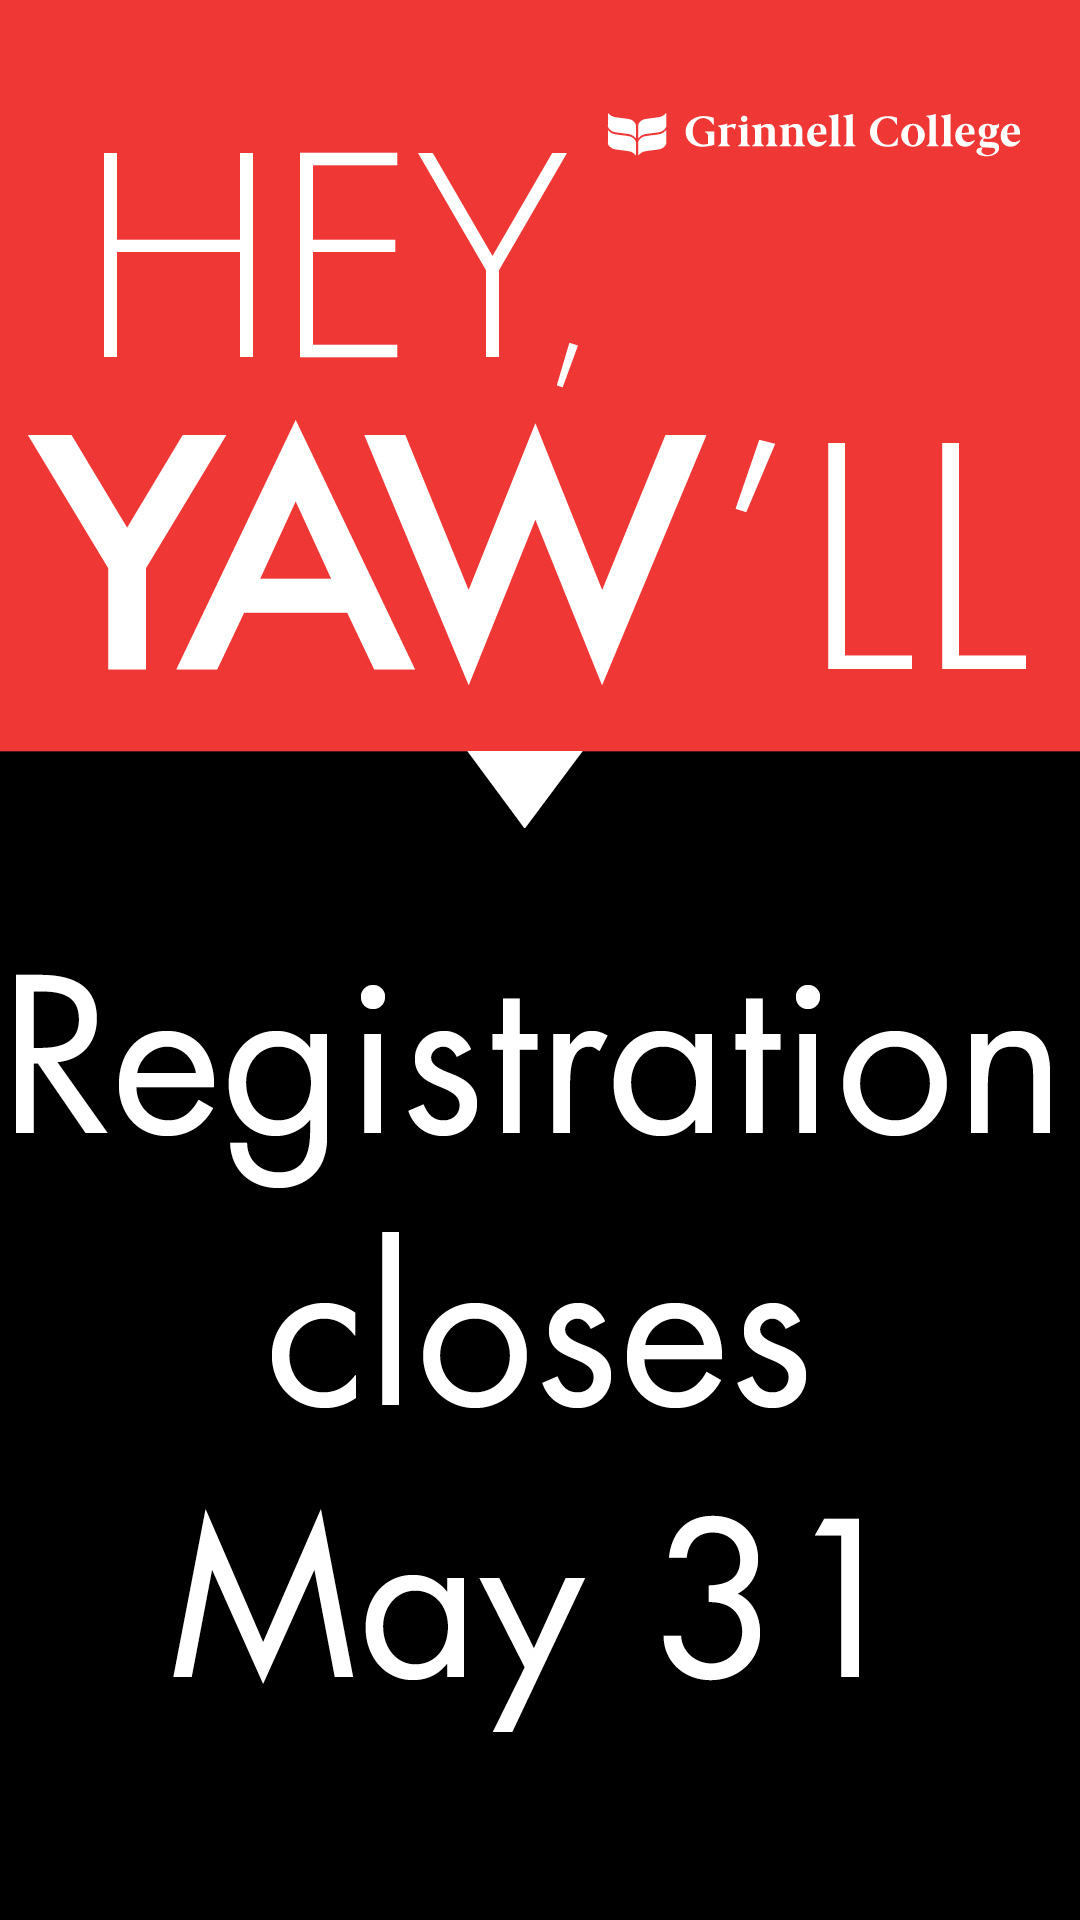 White Text on red and black backgrounds. Text: Hey YAW'll - Registration closes May 31.